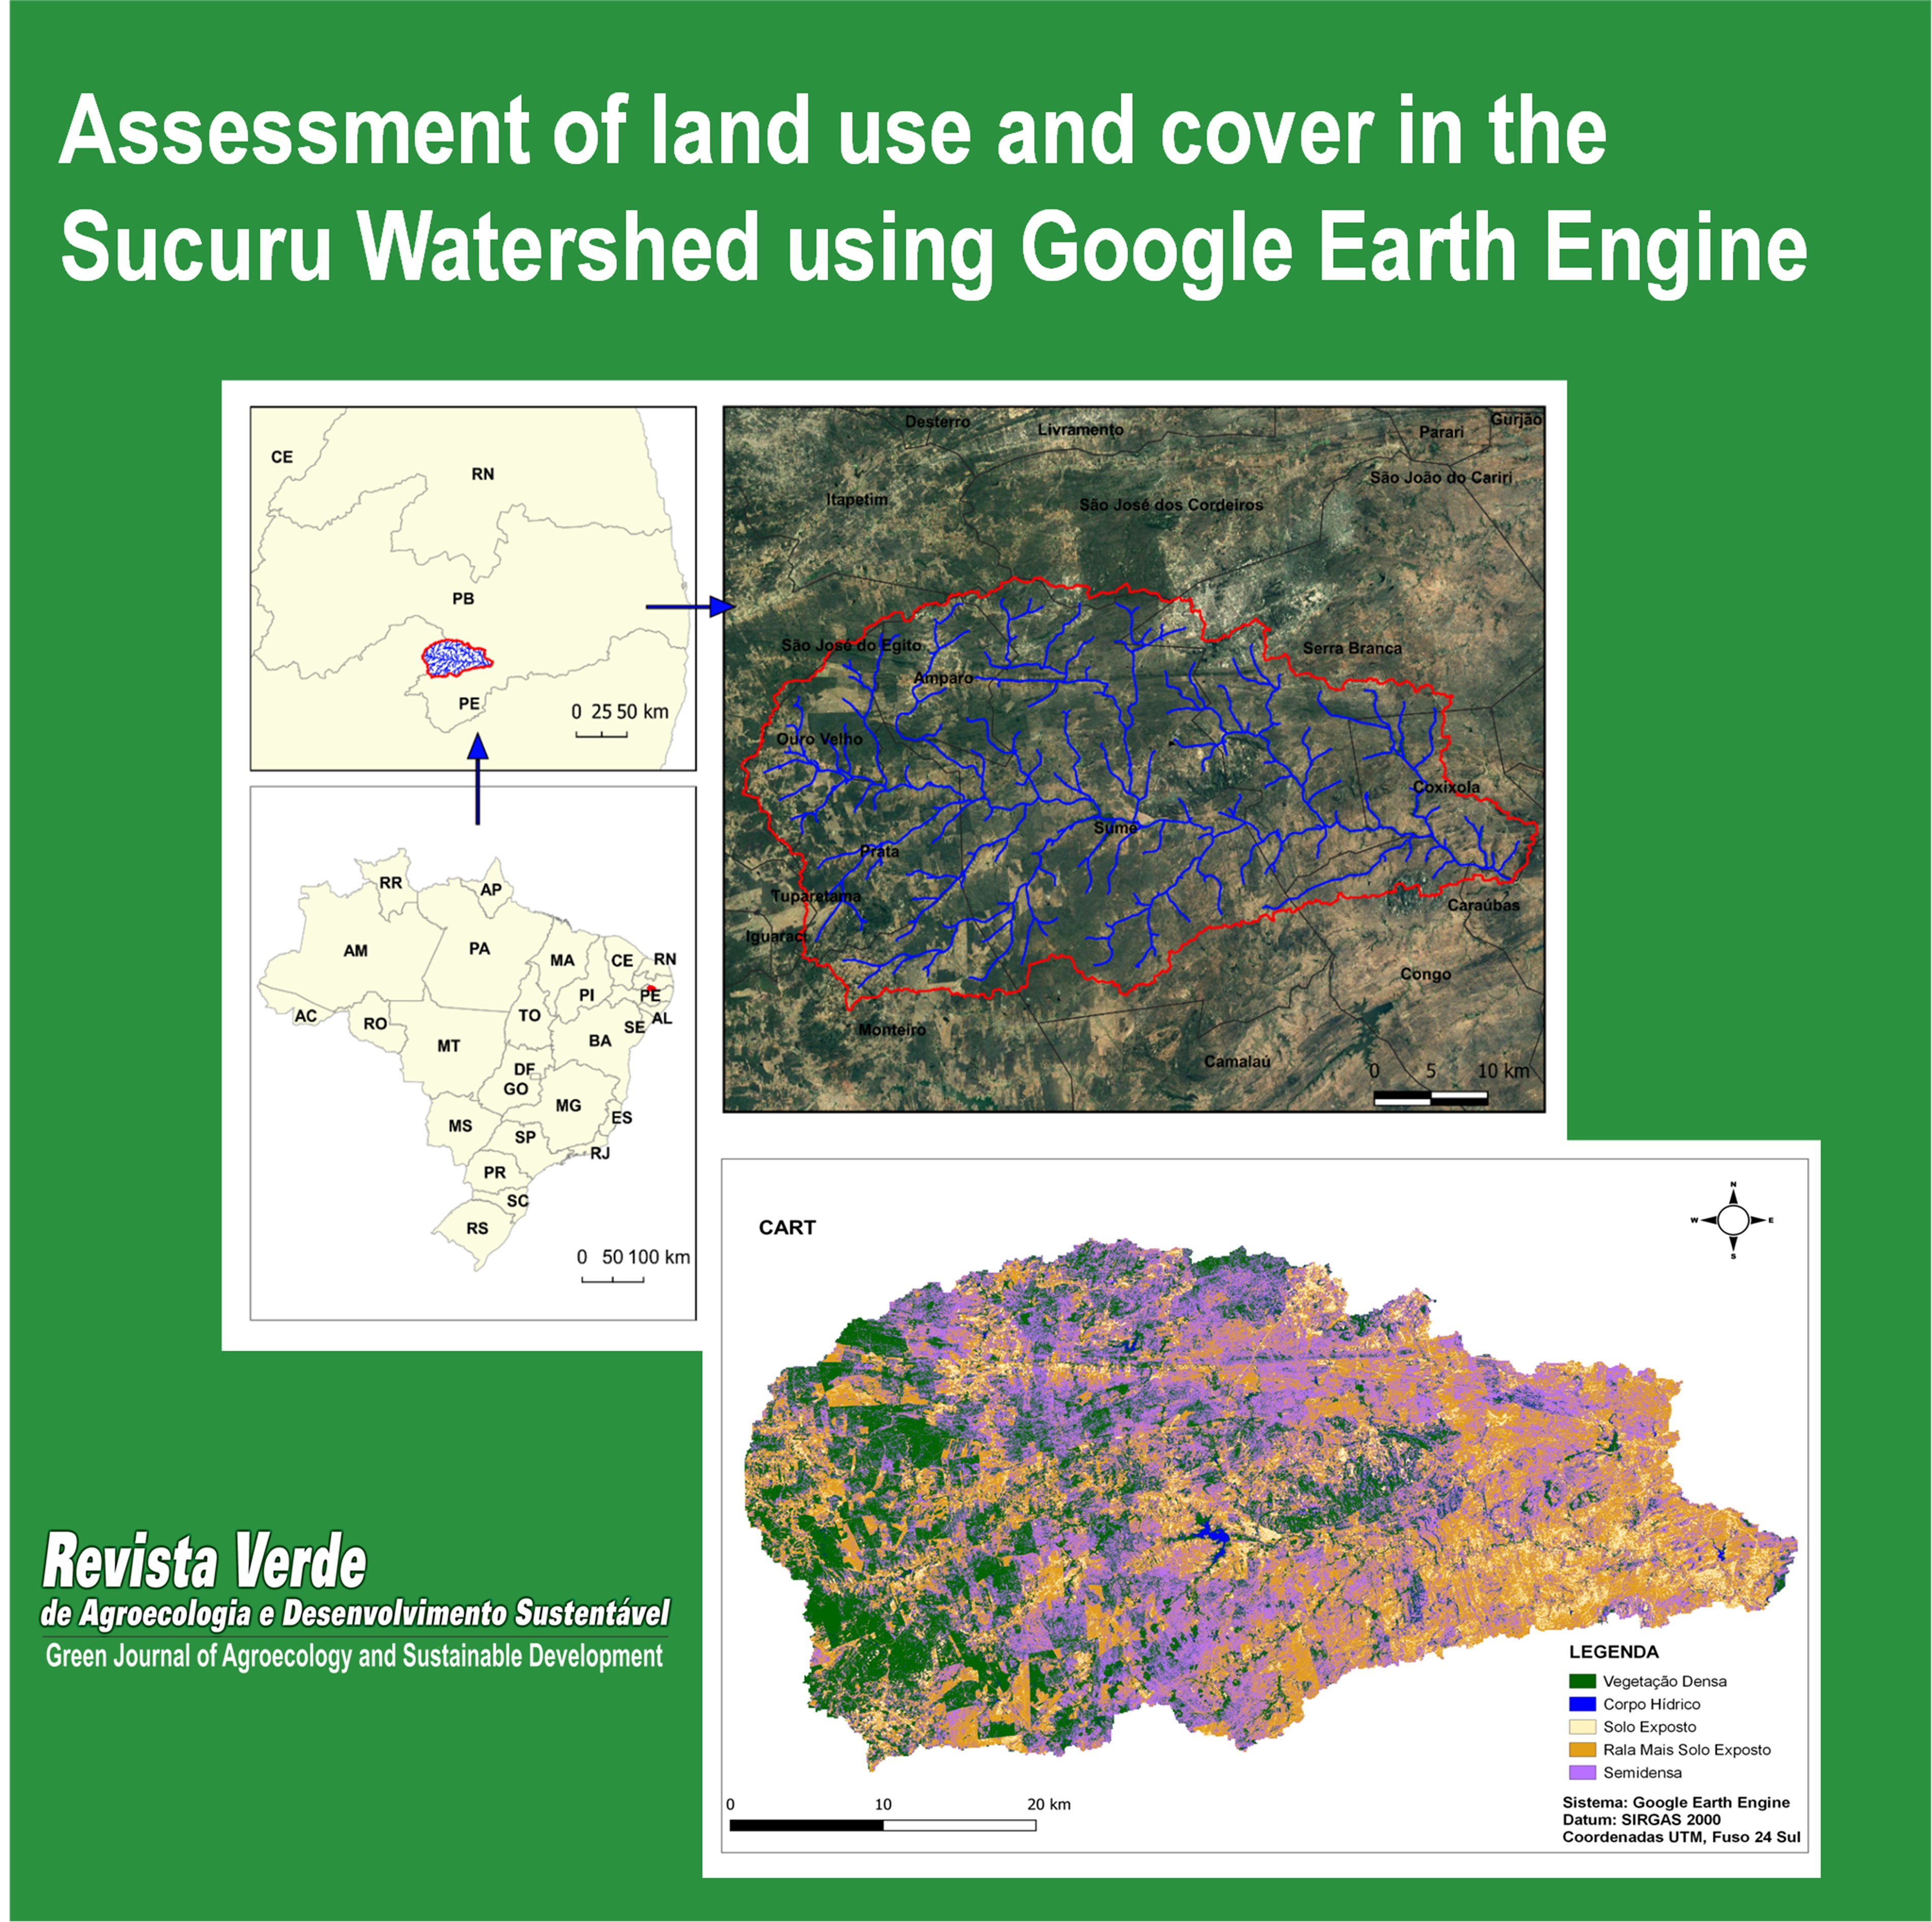 Assessment of land use and cover in the Sucuru Watershed using Google Earth Engine